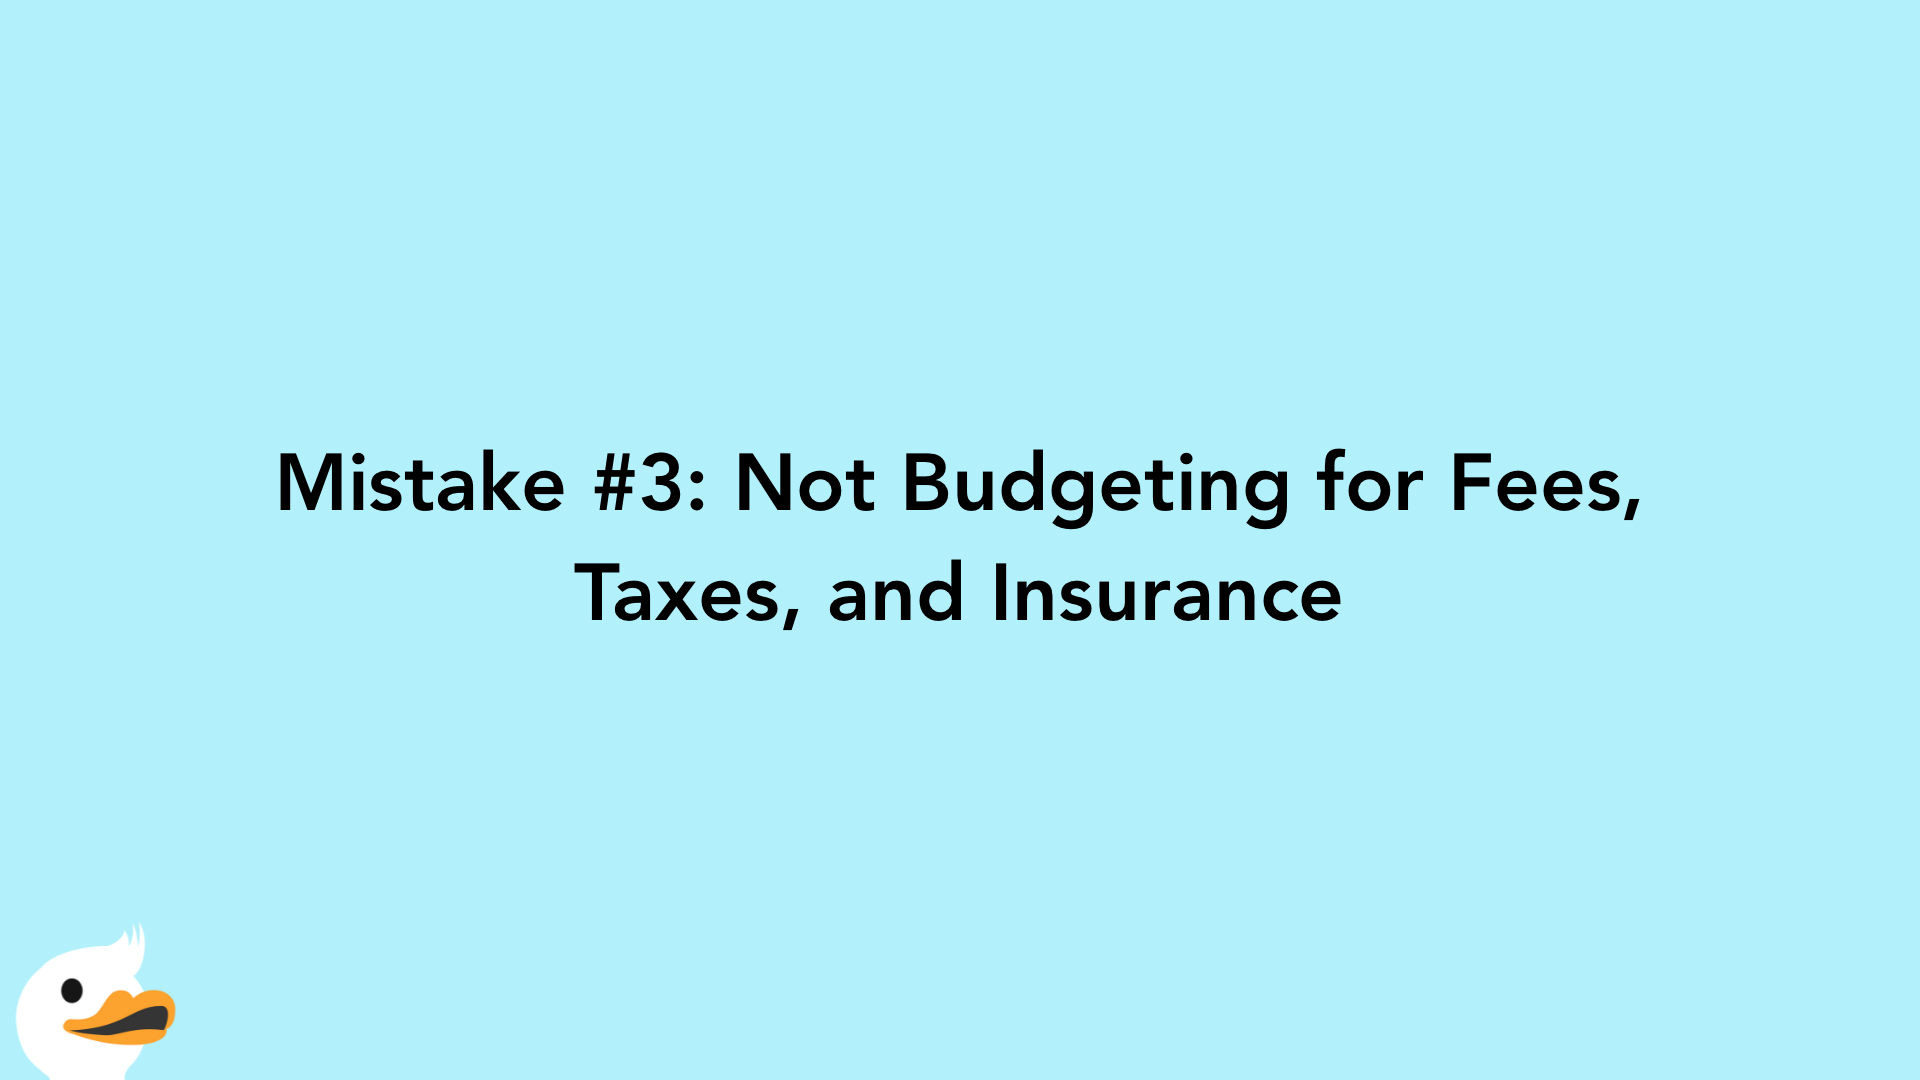 Mistake #3: Not Budgeting for Fees, Taxes, and Insurance